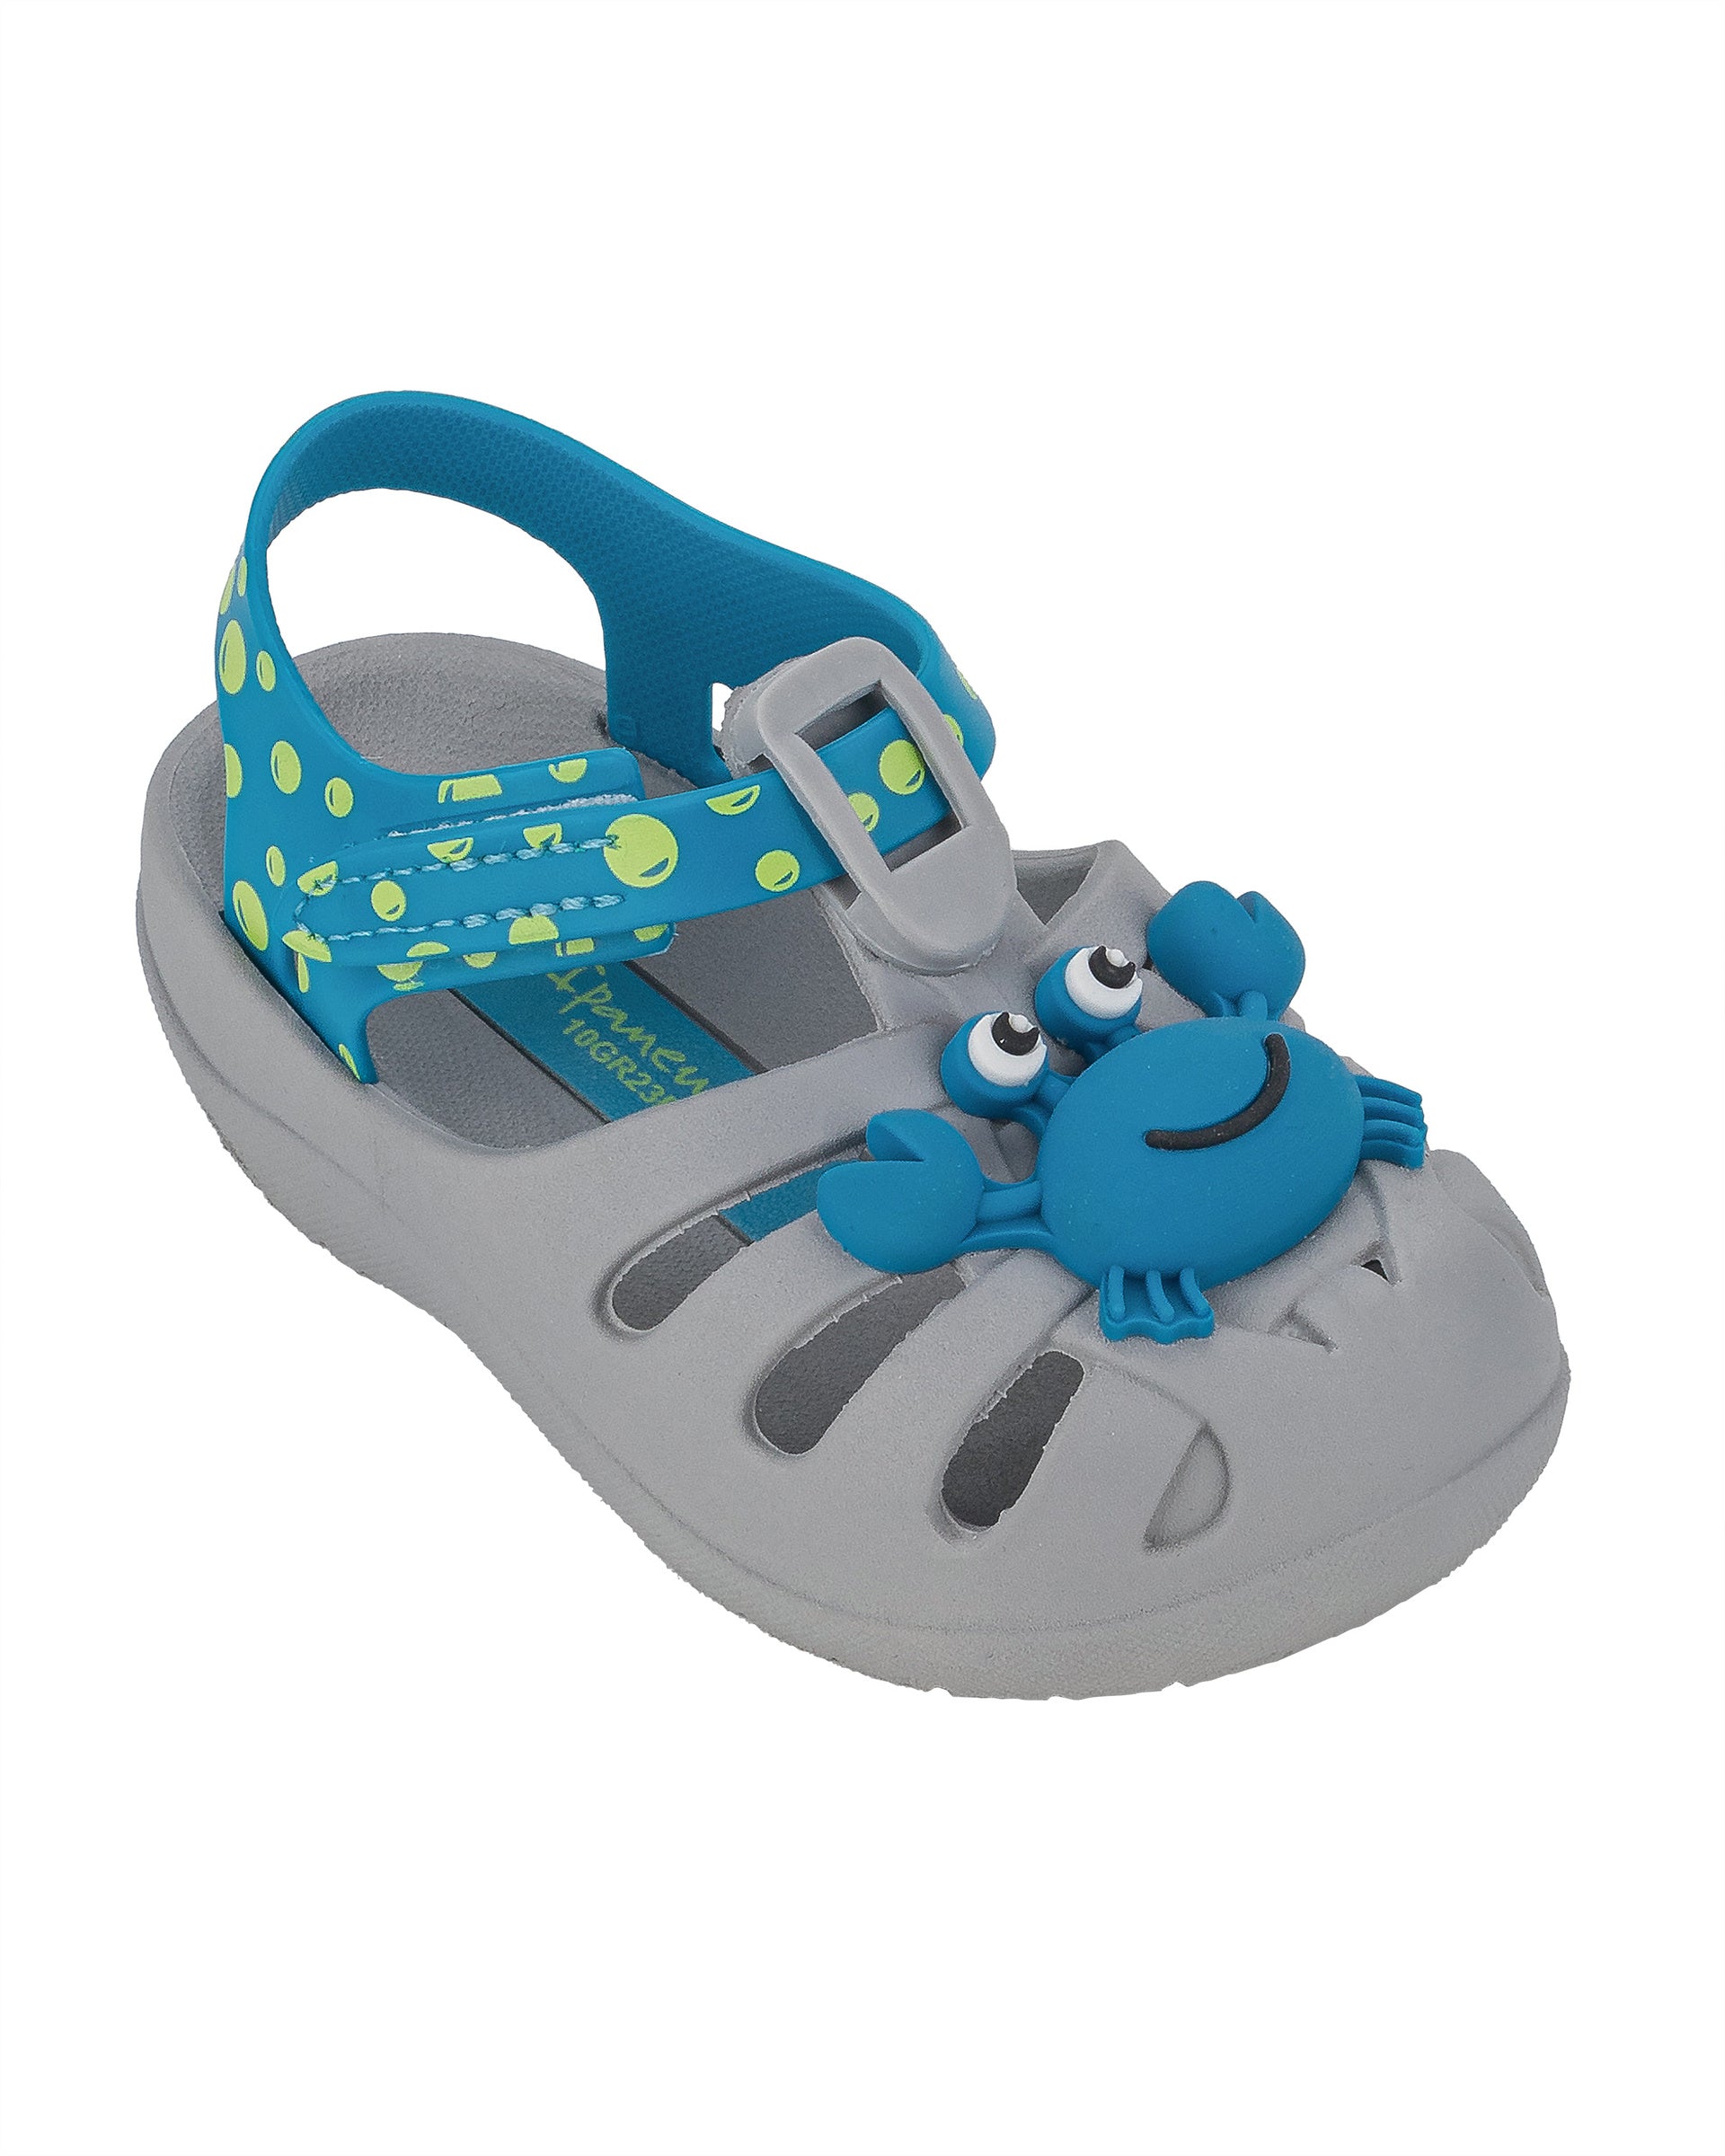 Angled view of a grey and blue Ipanema Summer baby fisherman sandal with blue crab on upper and green bubbles on a blue strap.